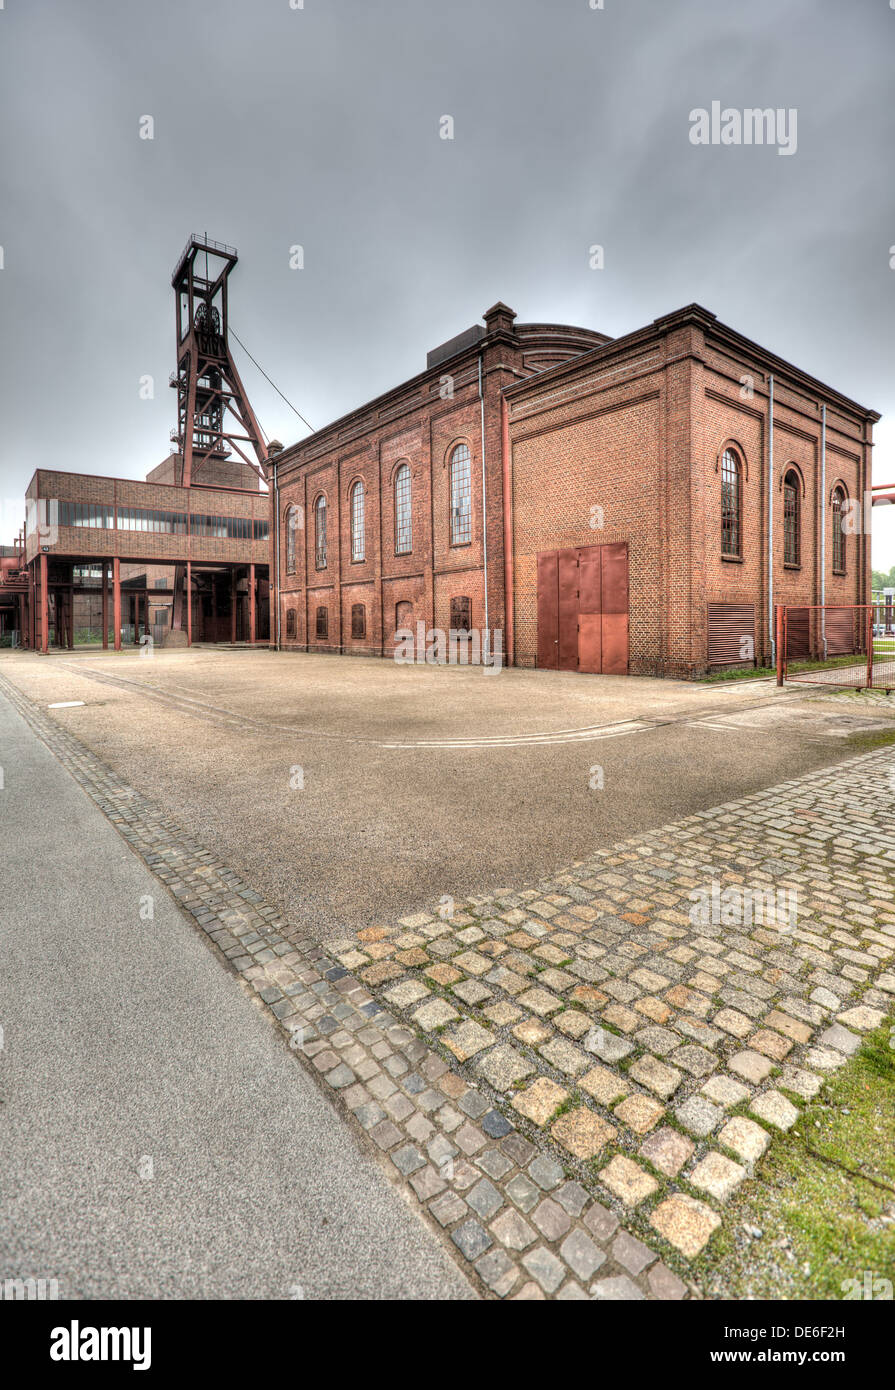 Deserted and derelict industrial heritage in the Ruhr region of Germany Stock Photo